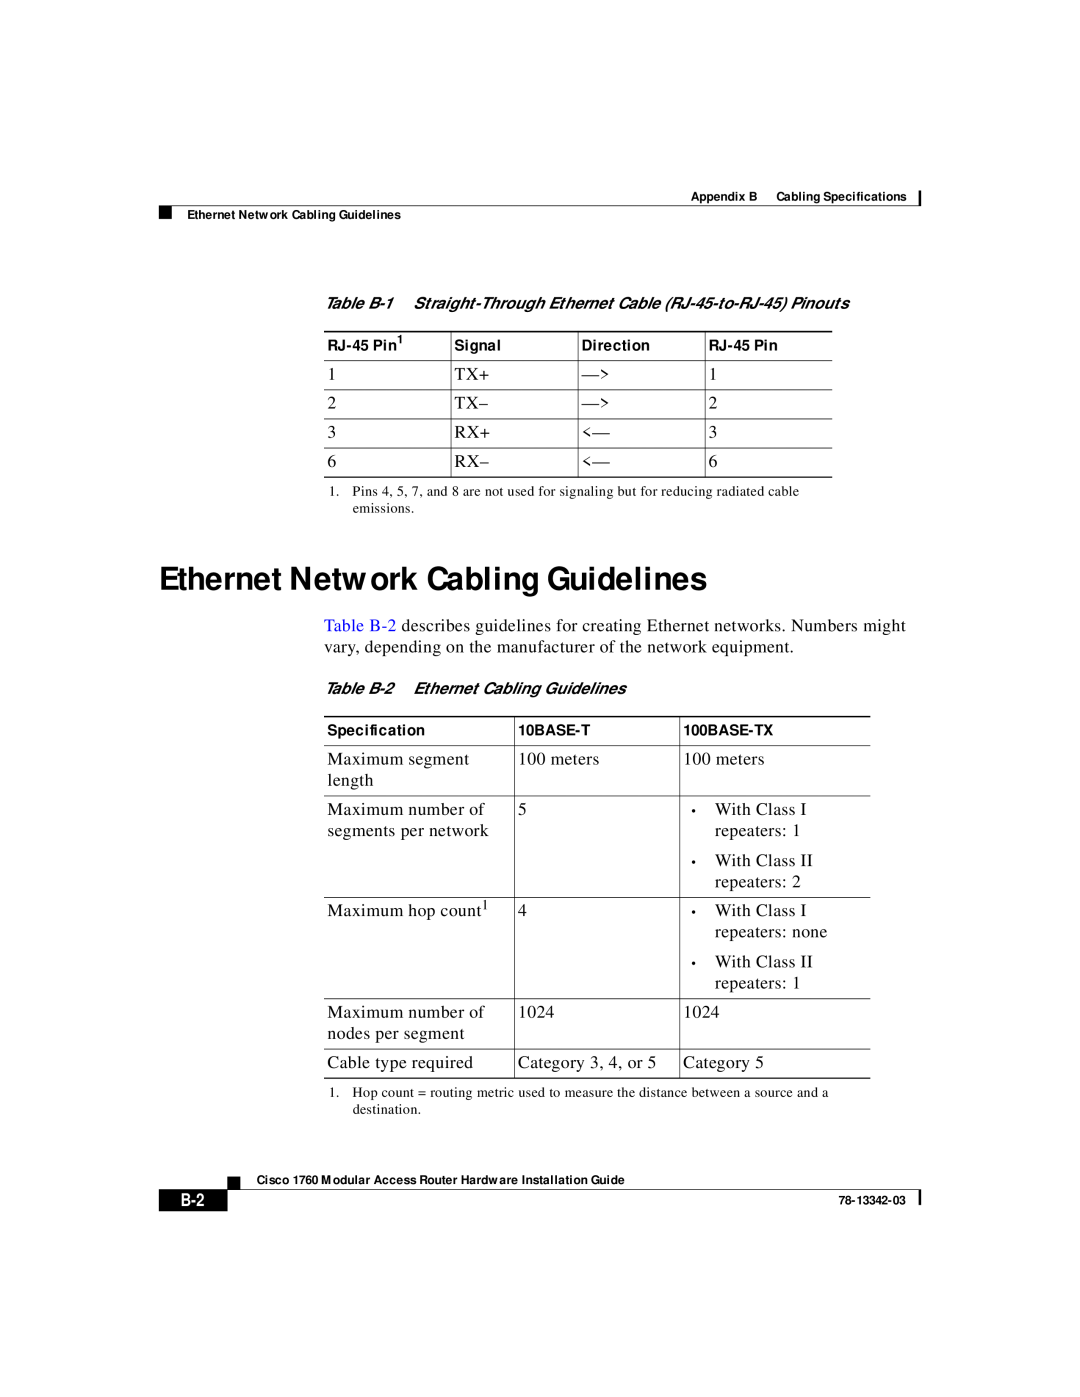 Cisco Systems 78-13342-03 Ethernet Network Cabling Guidelines, RJ-45 Pin, Signal, Direction, Specification, 10BASE-T 